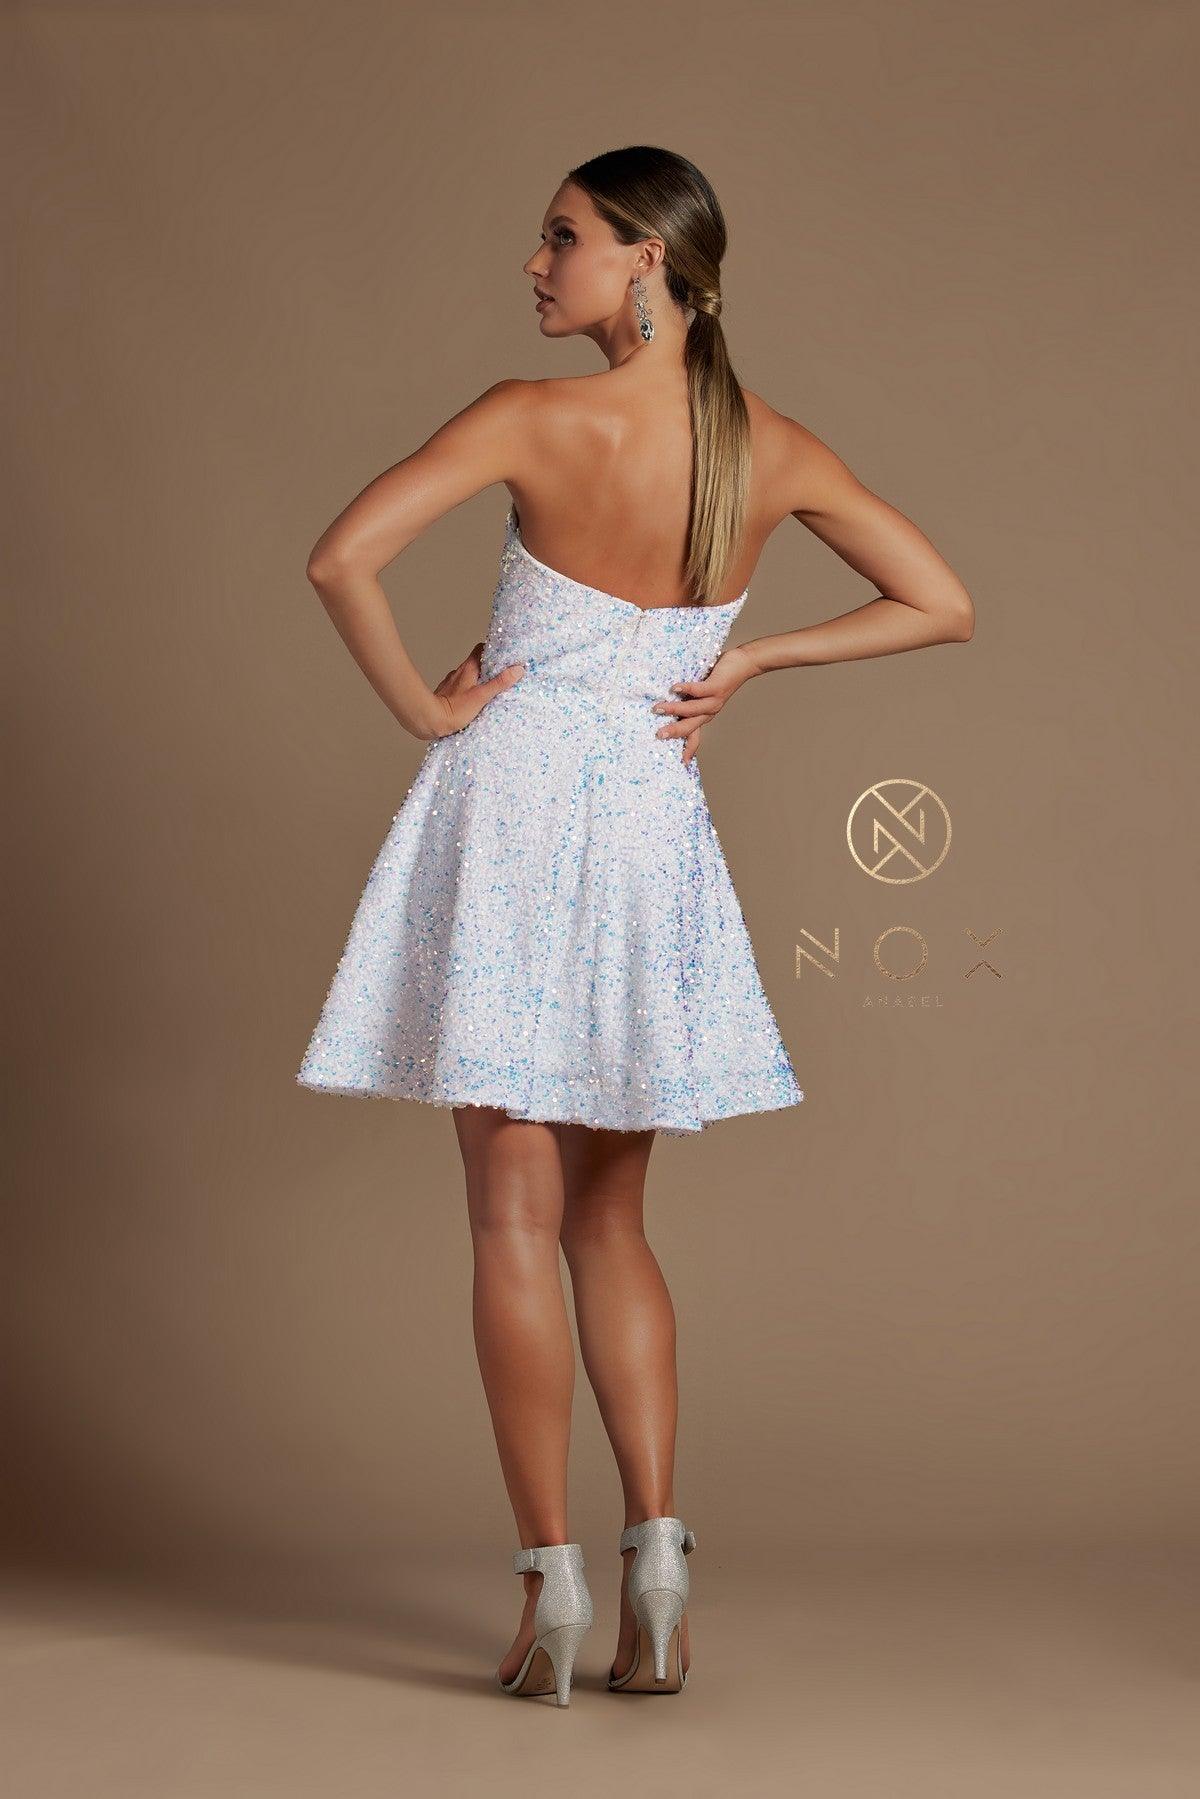 Strapless Sequins Short Homecoming Dress - The Dress Outlet